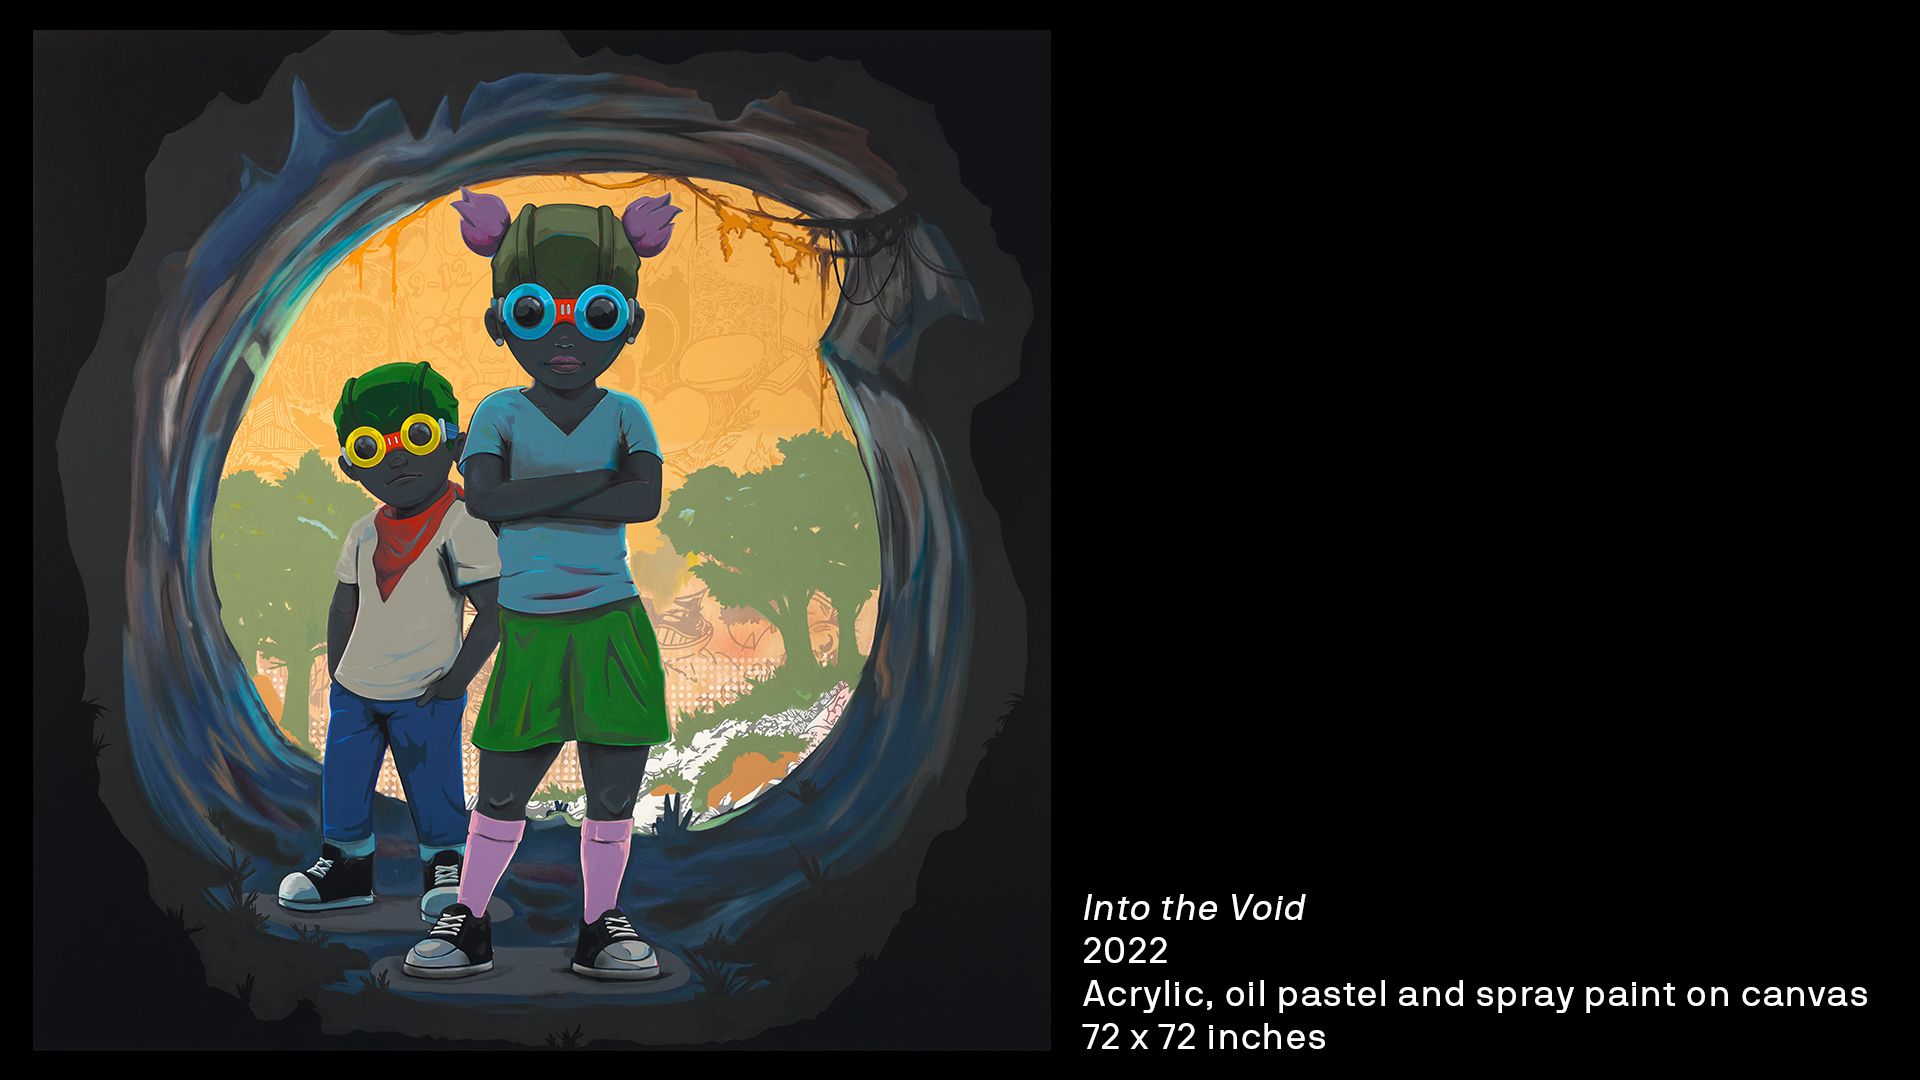 An acrylic, oil pastel and spray painted paiting by Hebru Brantley on canvas showing two characters about to enter a cave-like void. 